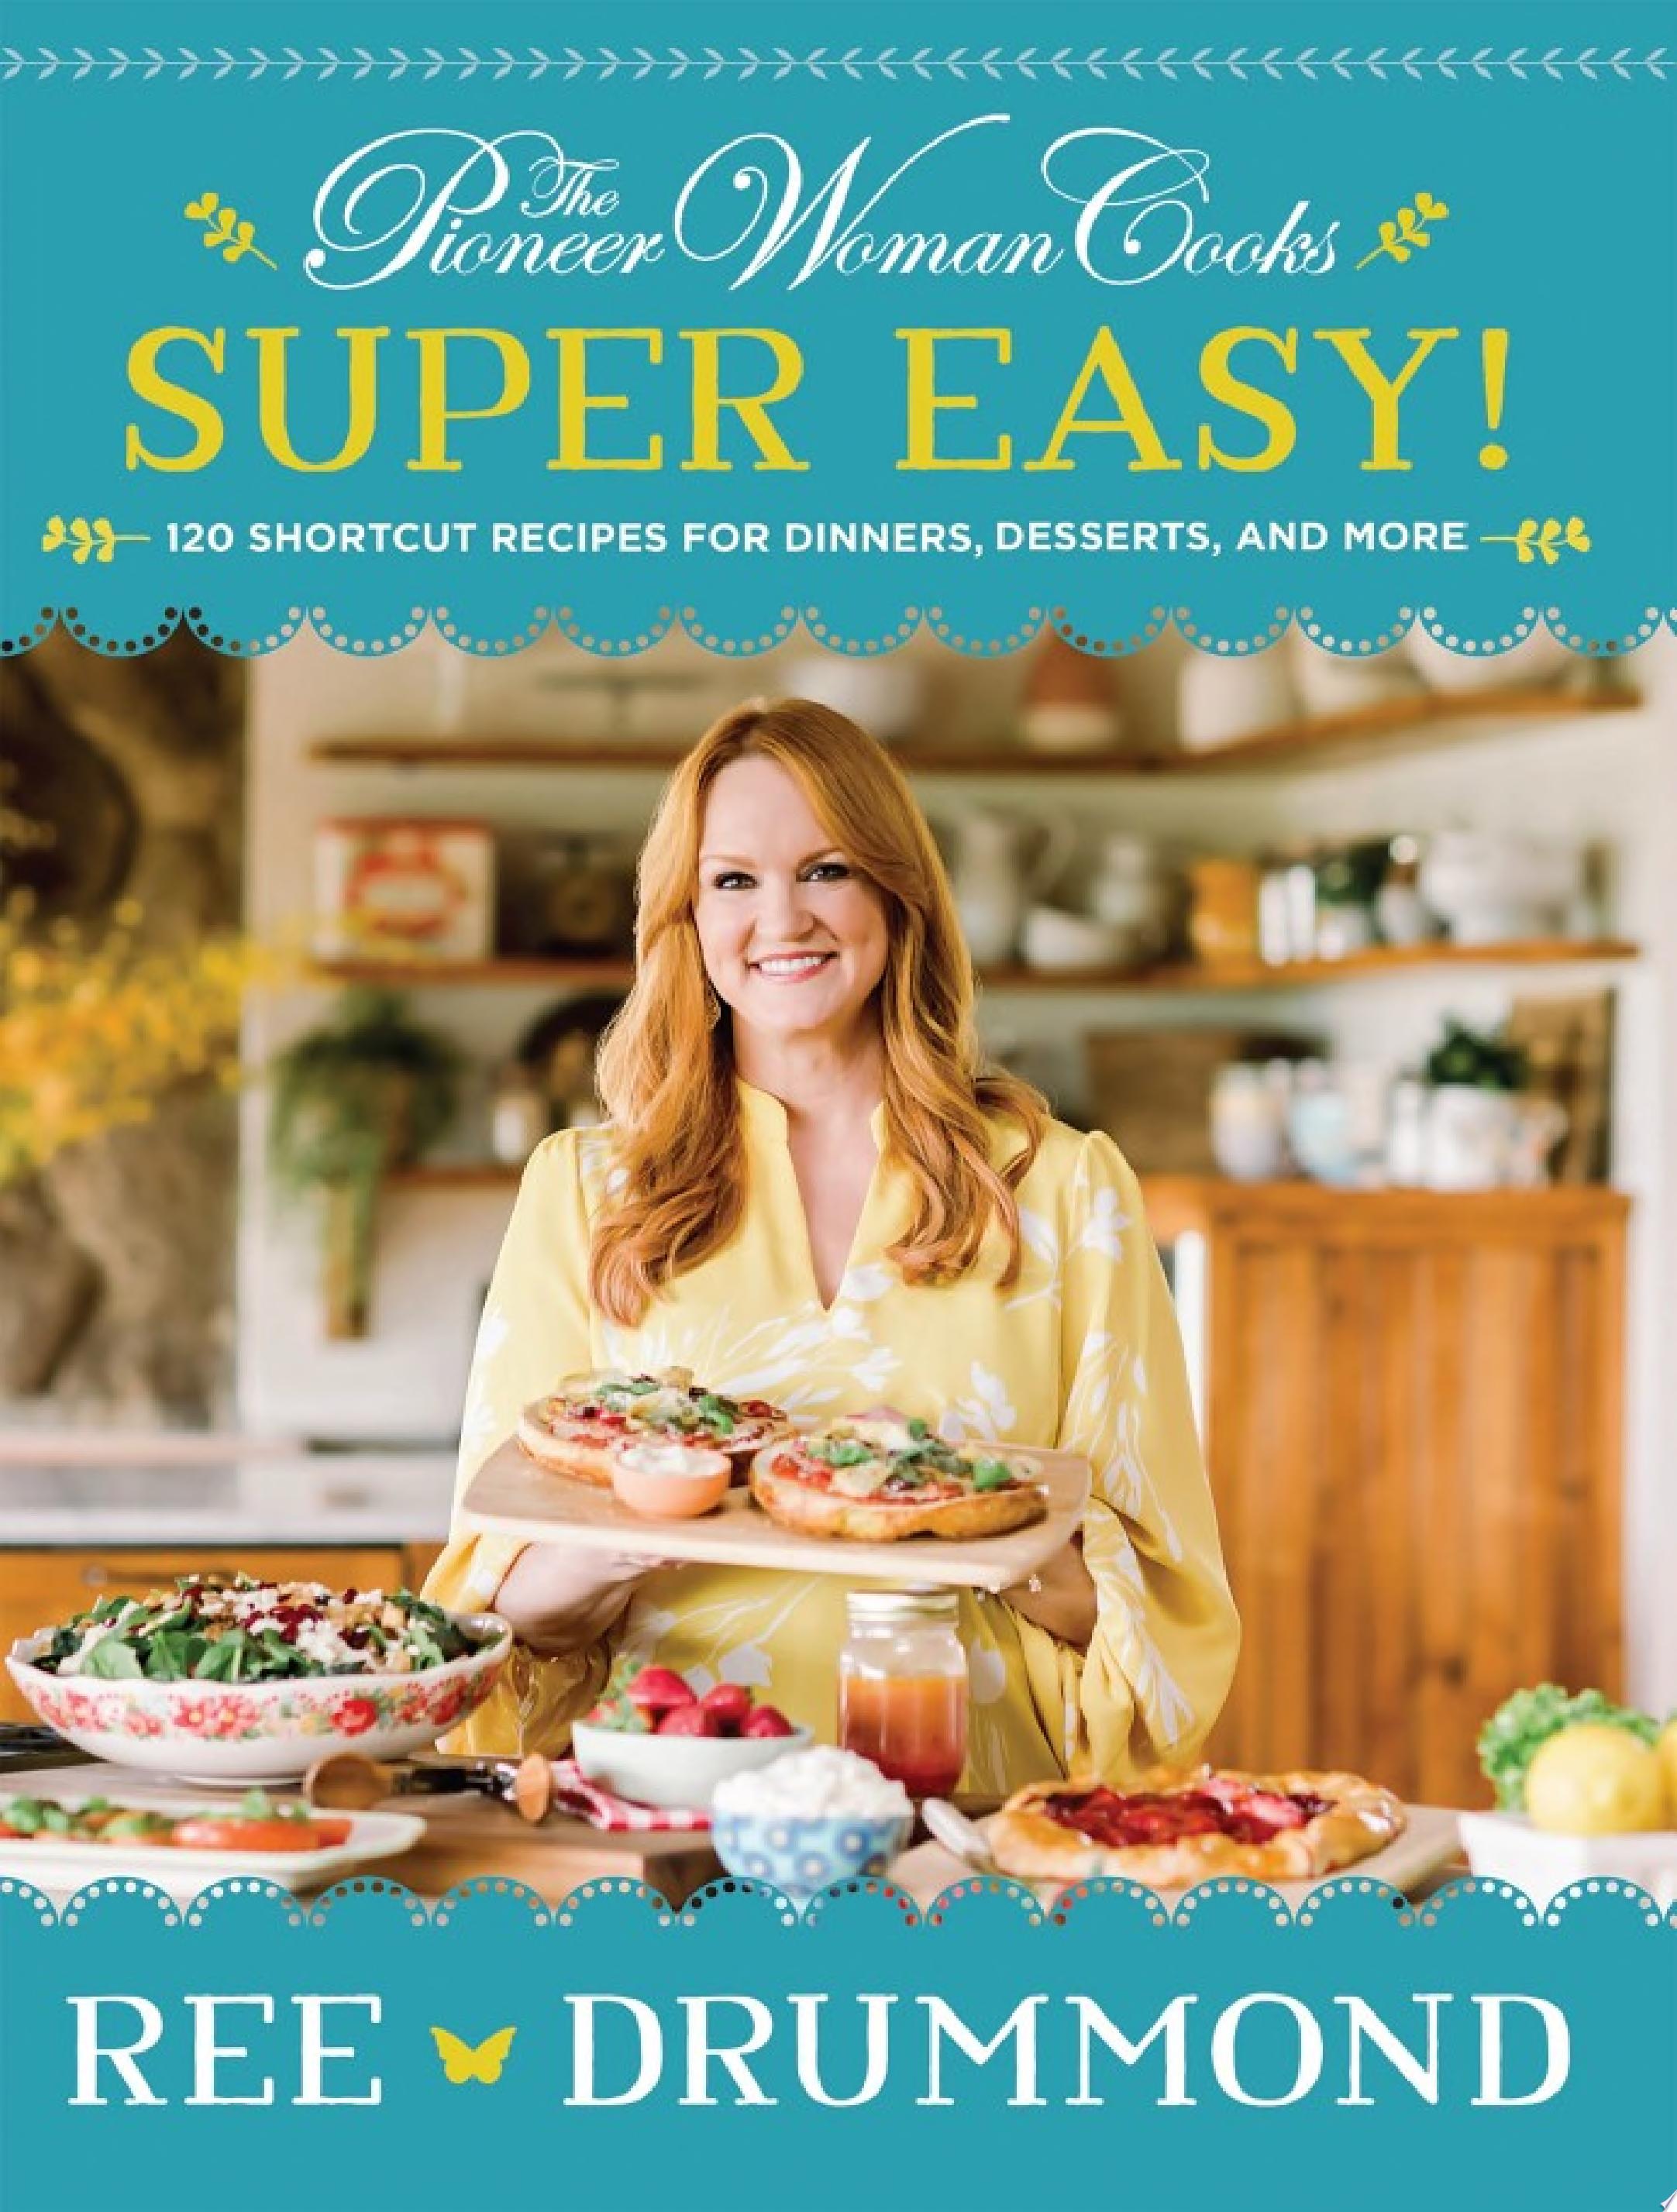 Image for "The Pioneer Woman Cooks—Super Easy!"